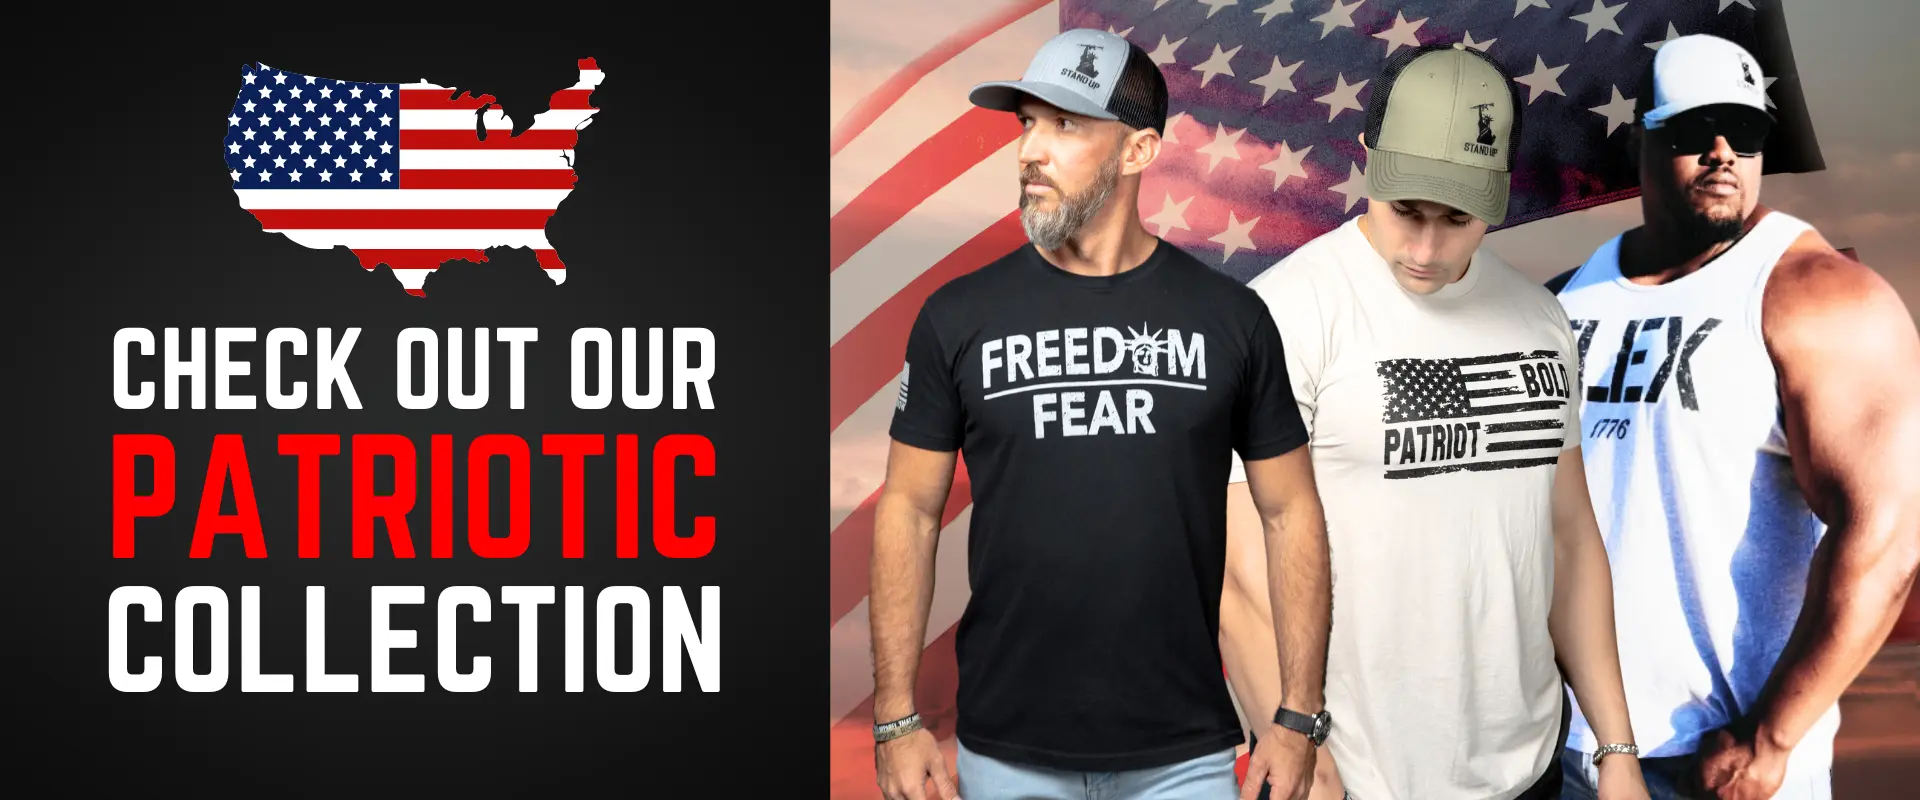 Checkout our Patriotic Collection - Website